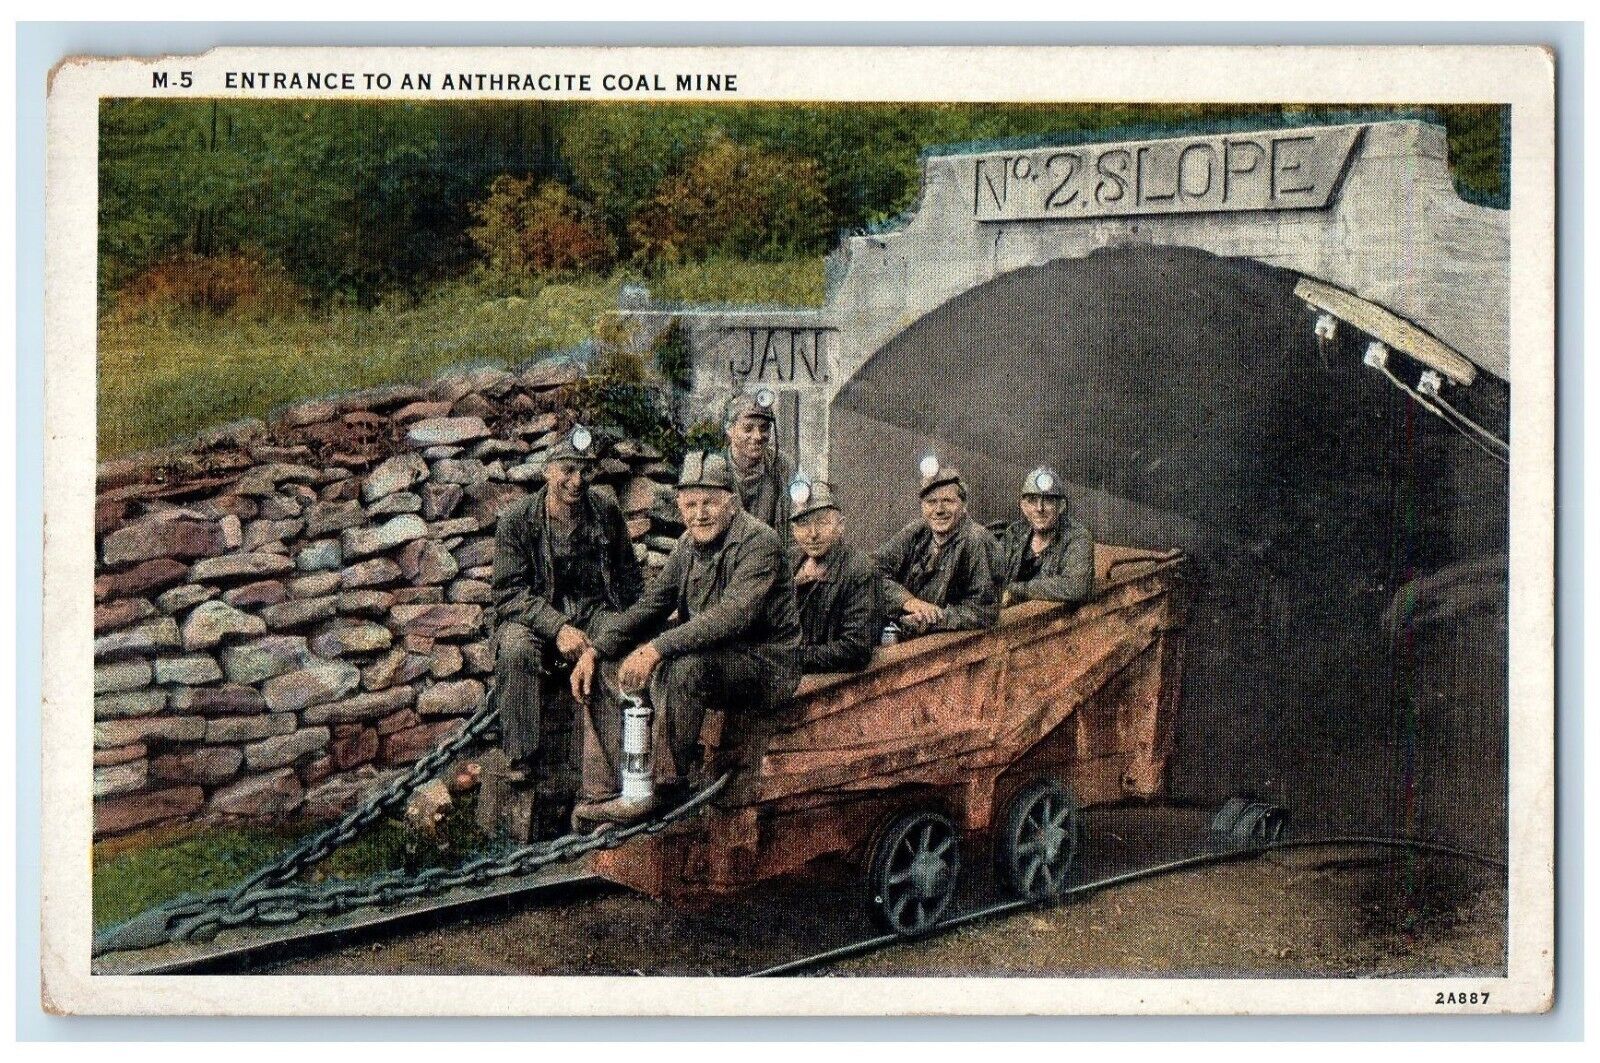 1937 Entrance To An Anthracite Coal Mine Slope Miners Posted Vintage Postcard